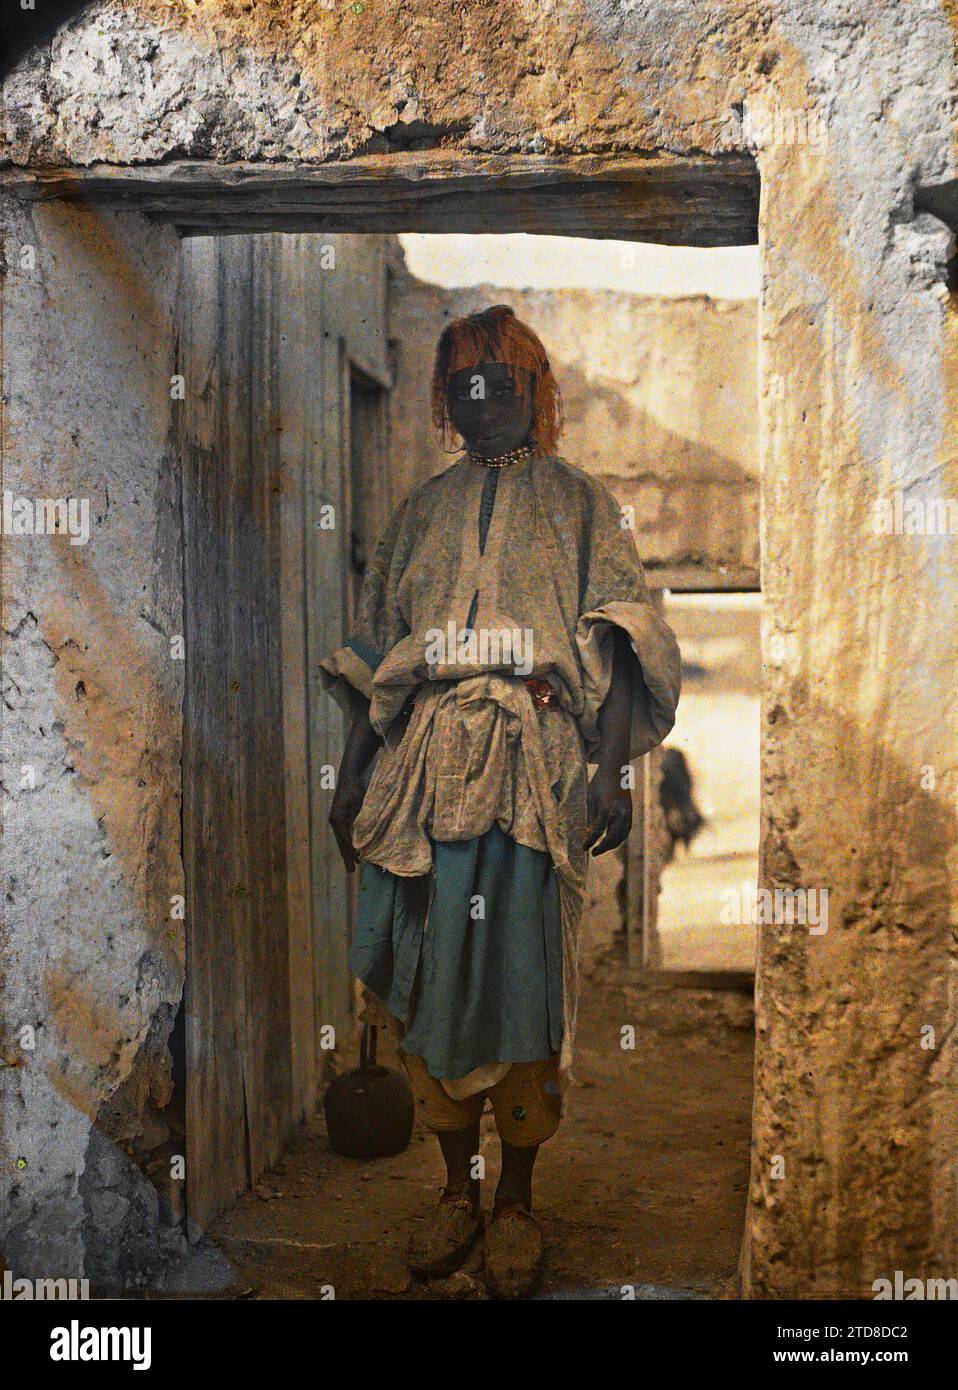 Settat, Morocco Sudanese Slave, Human Beings, Clothing, Daily Life, Woman, Costume, Portrait, Accessory, Domestic Object, Slave, Hairstyle, Headgear, Morocco, Settat, Sudanese Slave, Settat, 01/12/1912 - 31/12/1912, Passet, Stéphane, photographer, 1912-1913 - Maroc - Stéphane Passet - (December-January), Autochrome, photo, Glass, Autochrome, photo, Positive, Horizontal, Size 9 x 12 cm Stock Photo